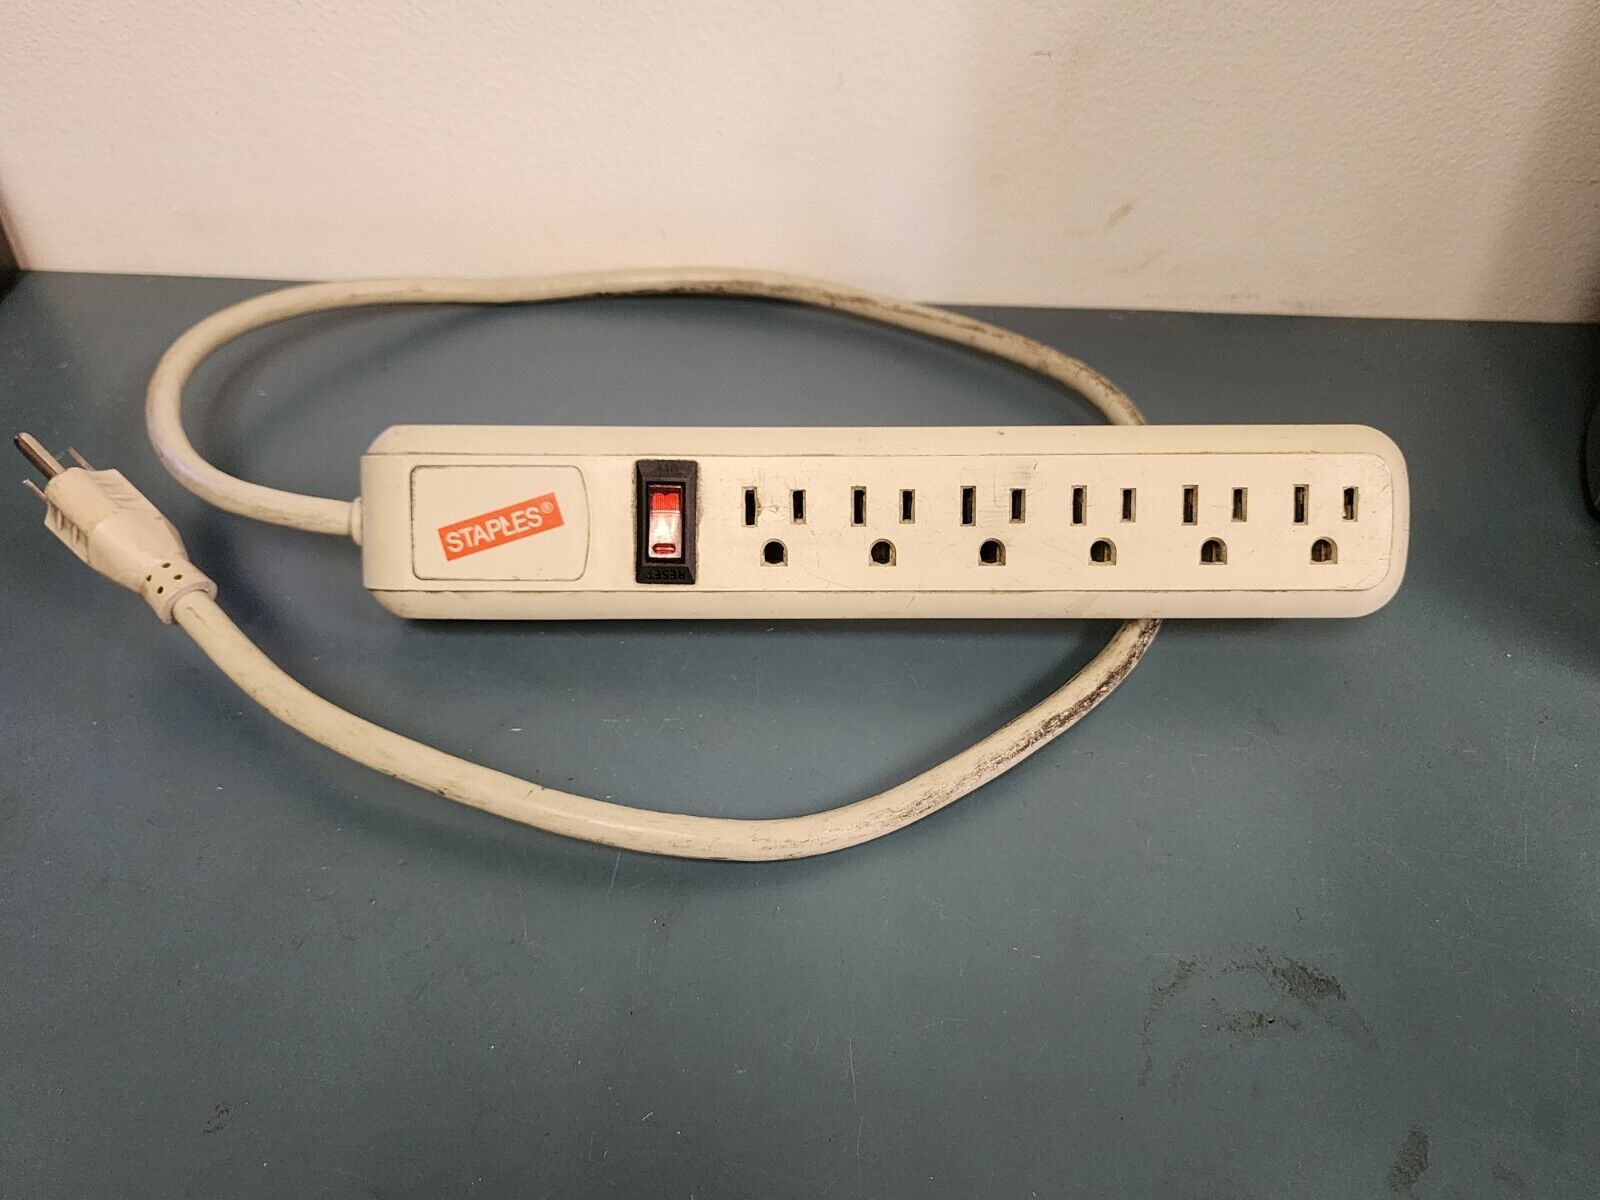 STAPLES POWER SUPPLY WITH 3 FT CORD